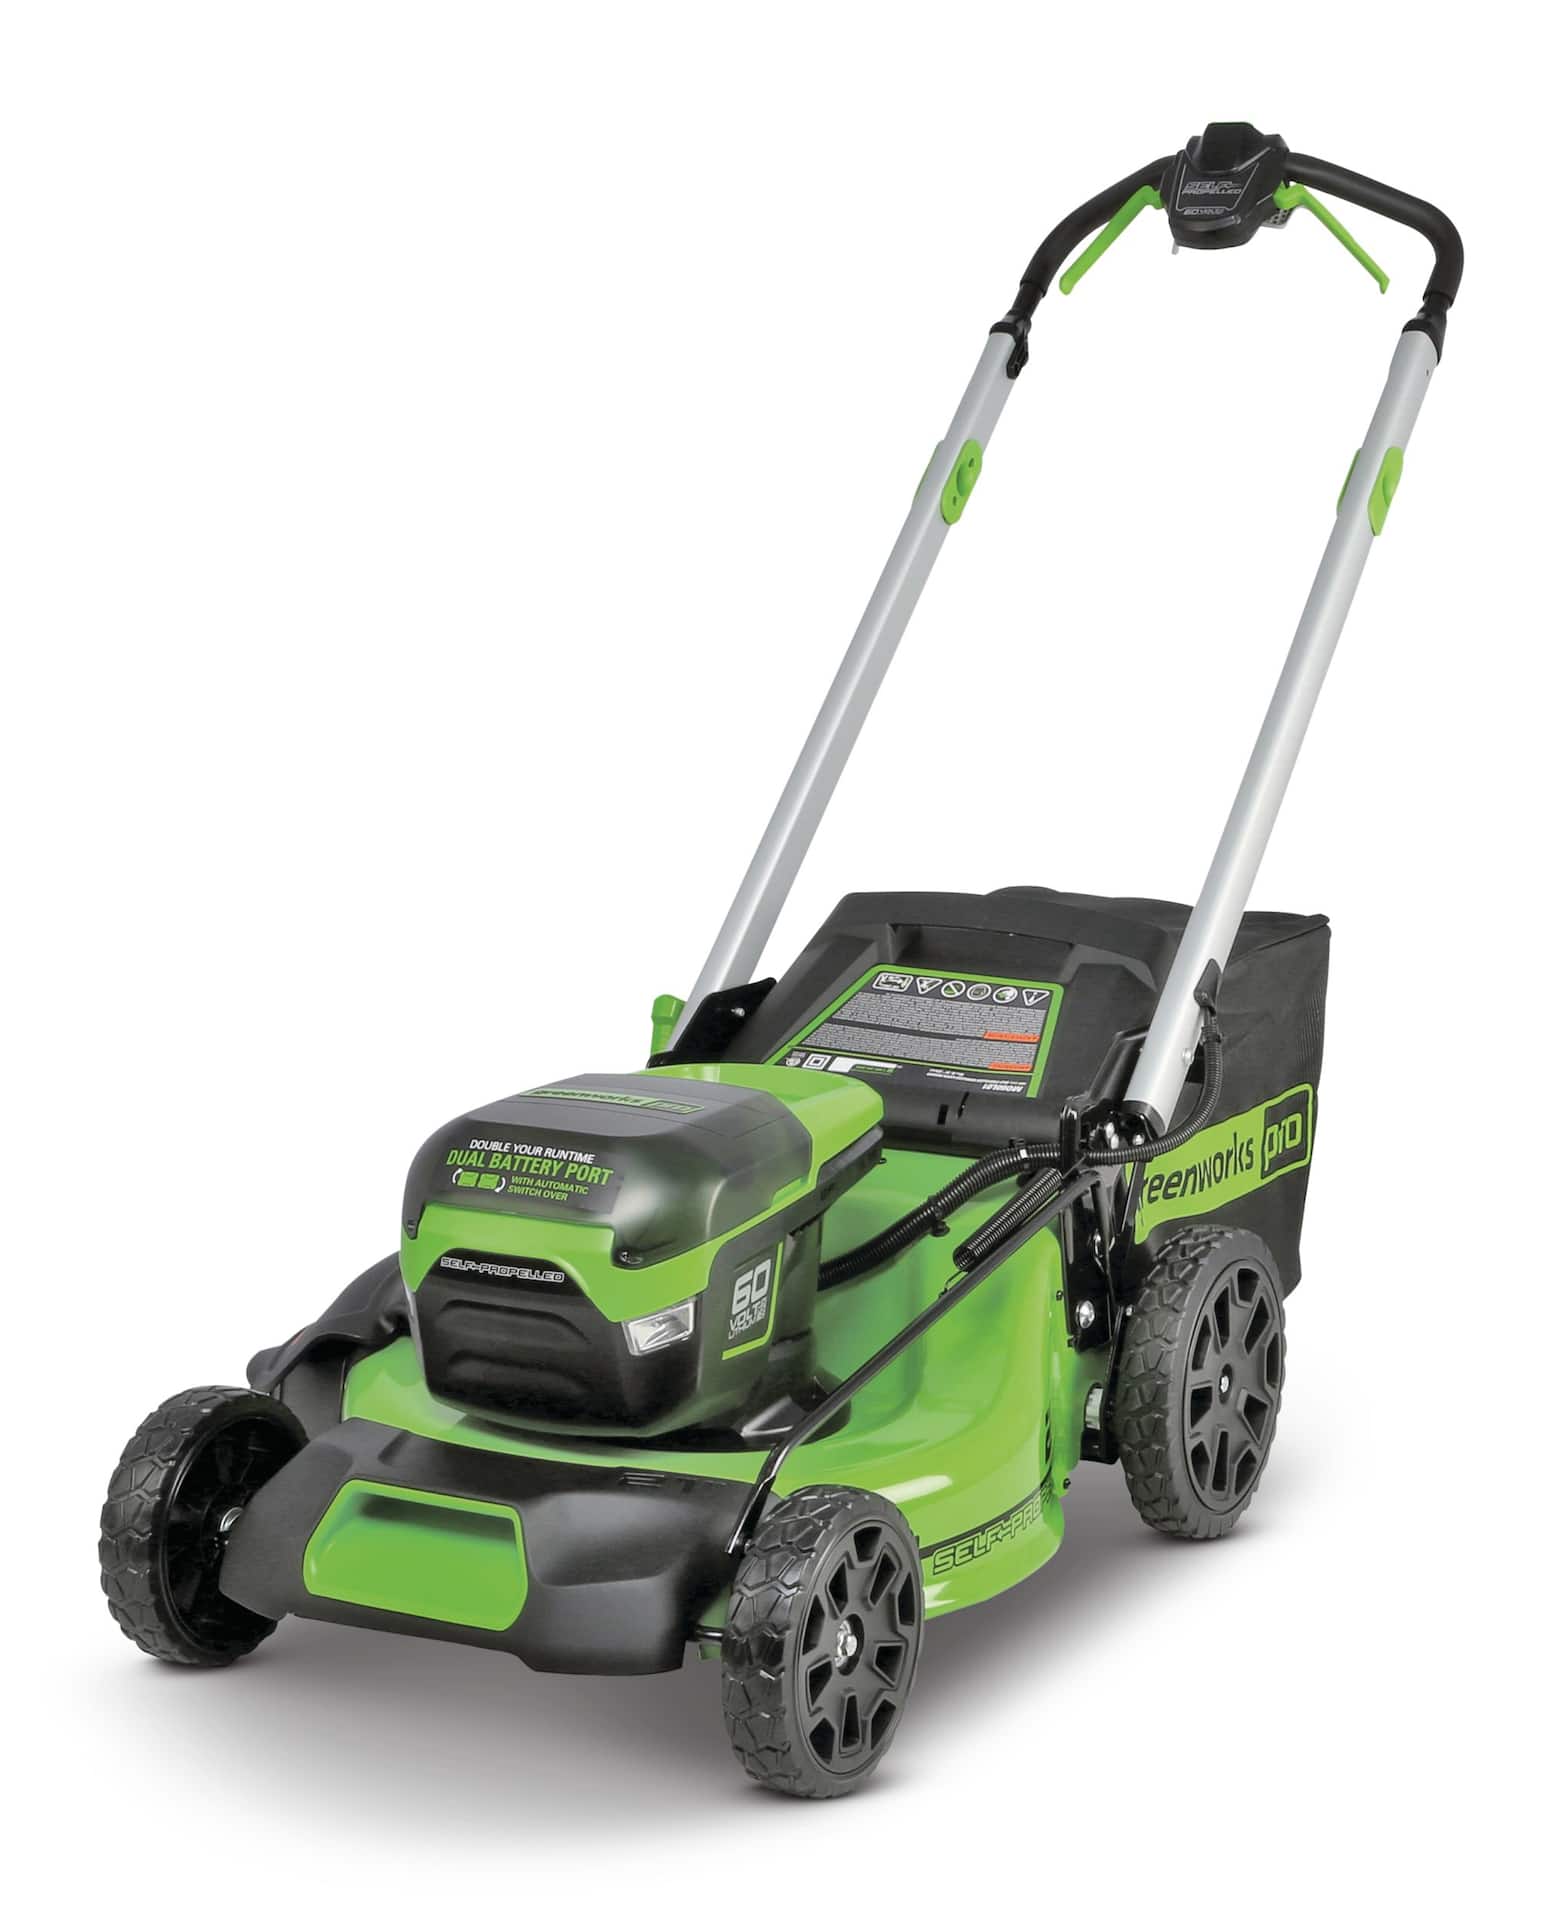 Greenworks PRO 60V 3-in-1 Variable Speed, Cordless Self-Propelled Lawn ...